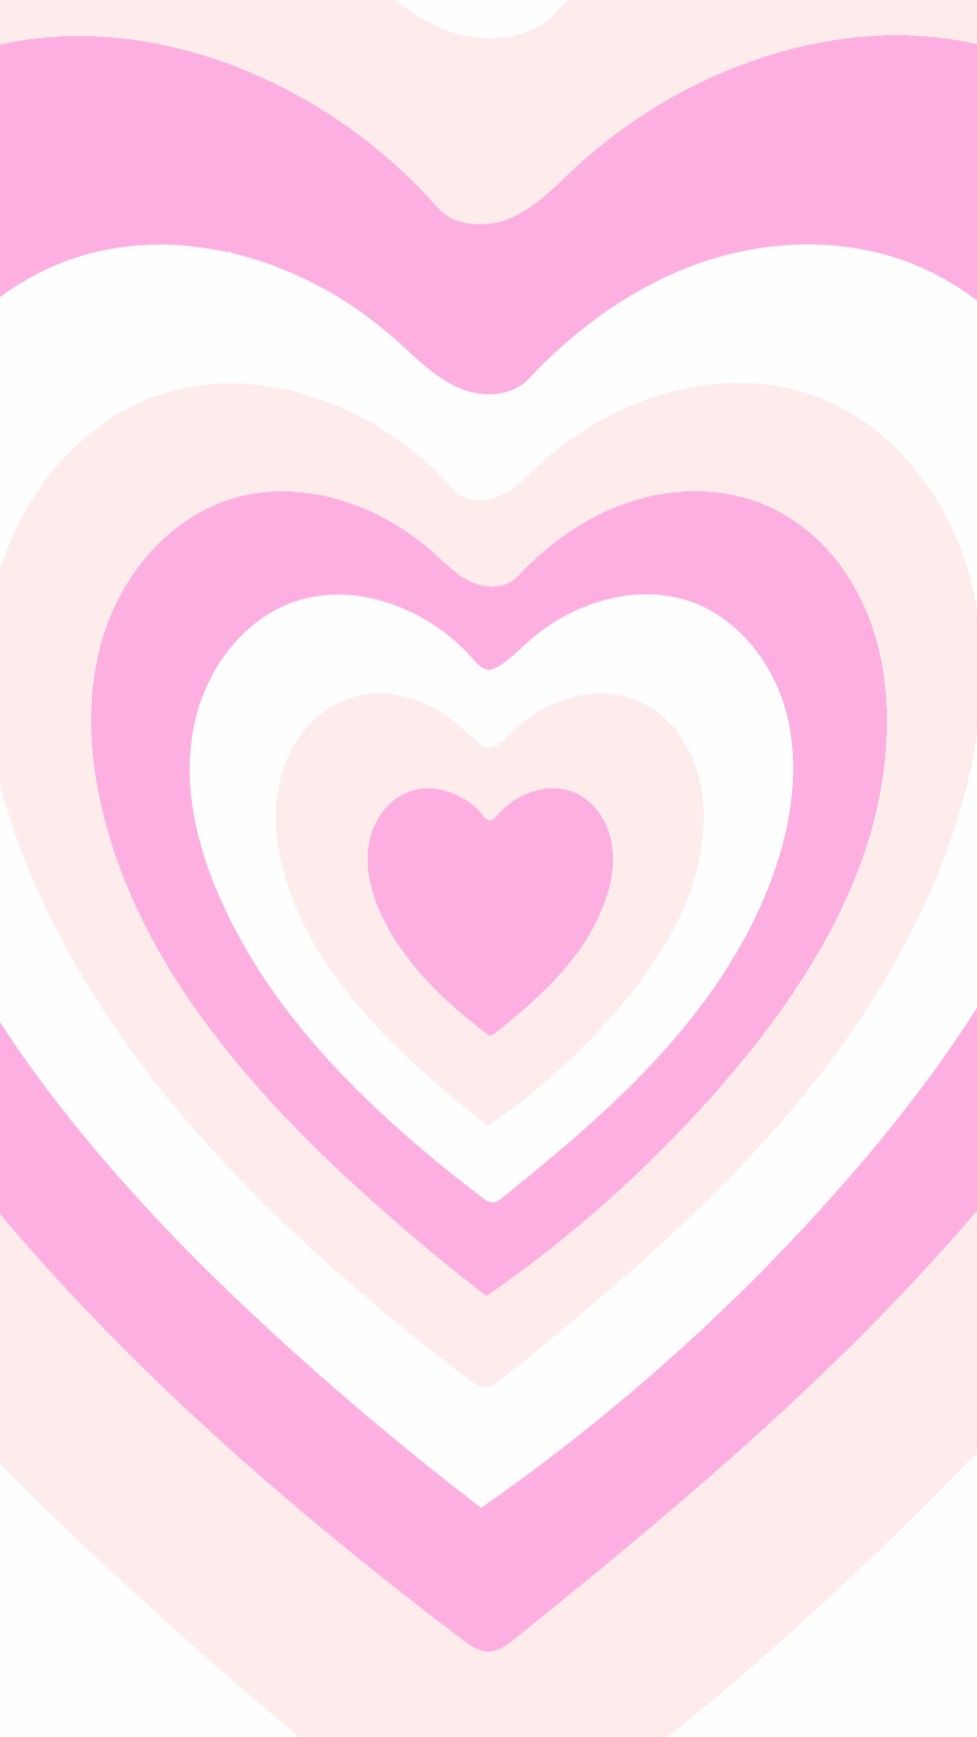 Y2k powerpuff girls pink hearts aesthetic background and phone wallpaper. Y2k background, Heart wallpaper, Wallpaper